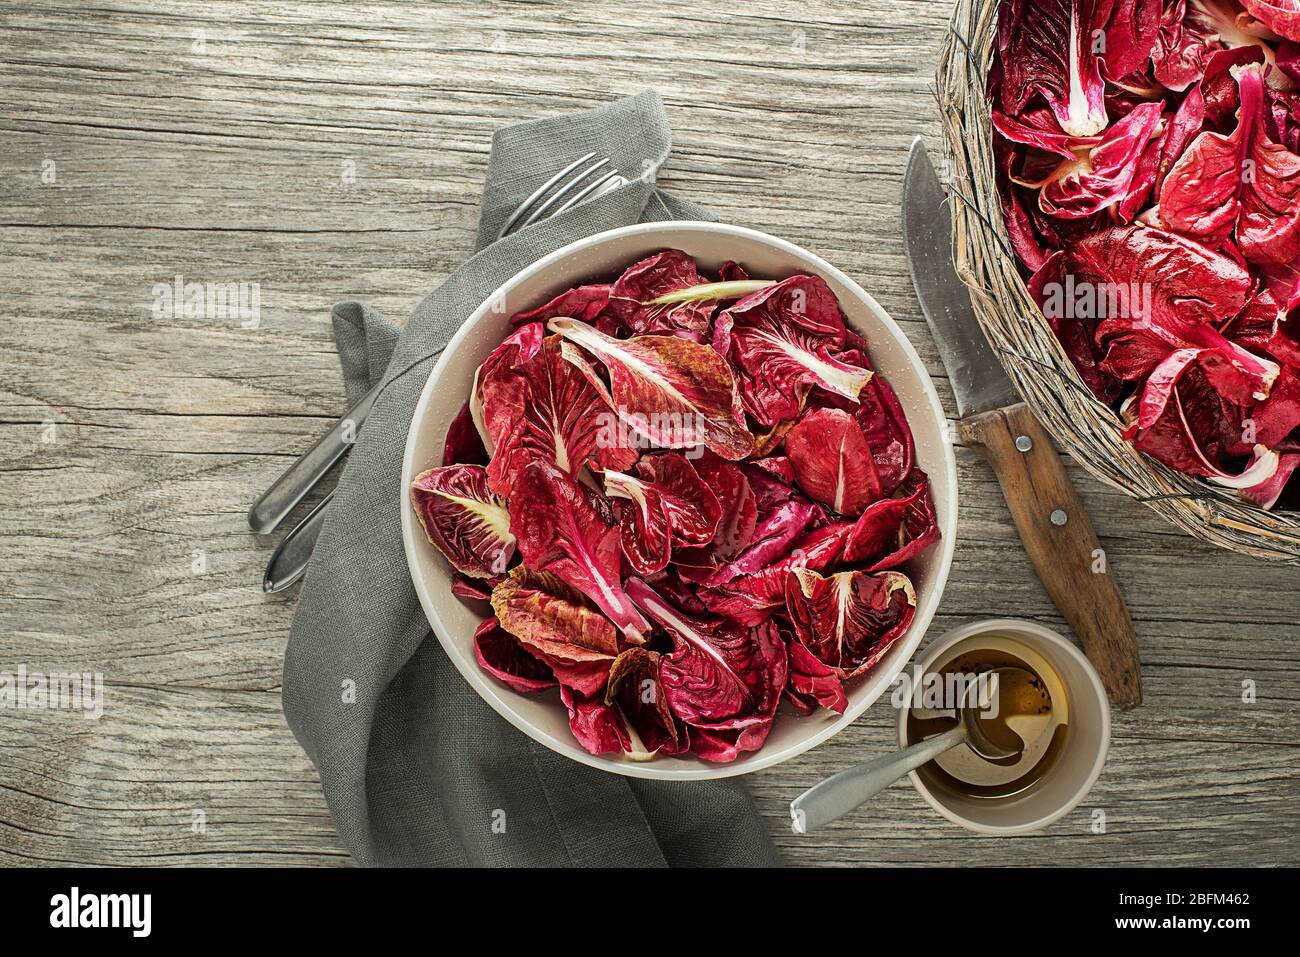 Healthy red lettuce salad meal on wooden table background. Freshly picked radicchio Stock Photo